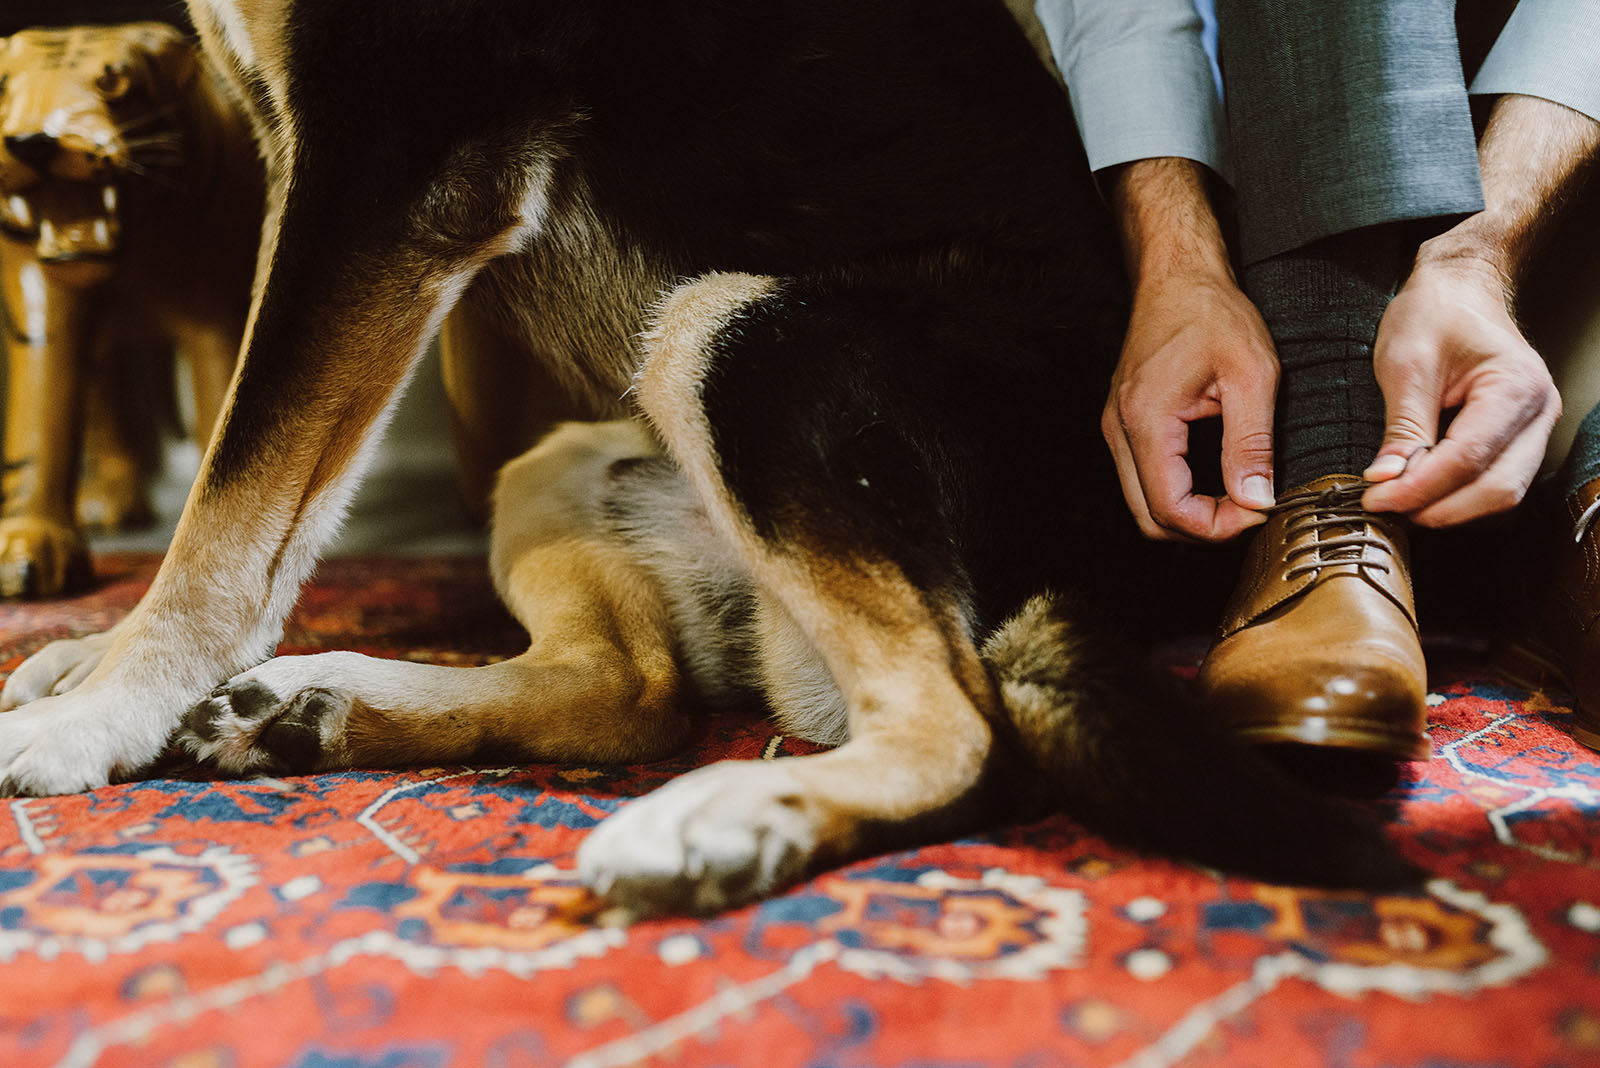 groom tying shoes next to his dog - portland wedding photography